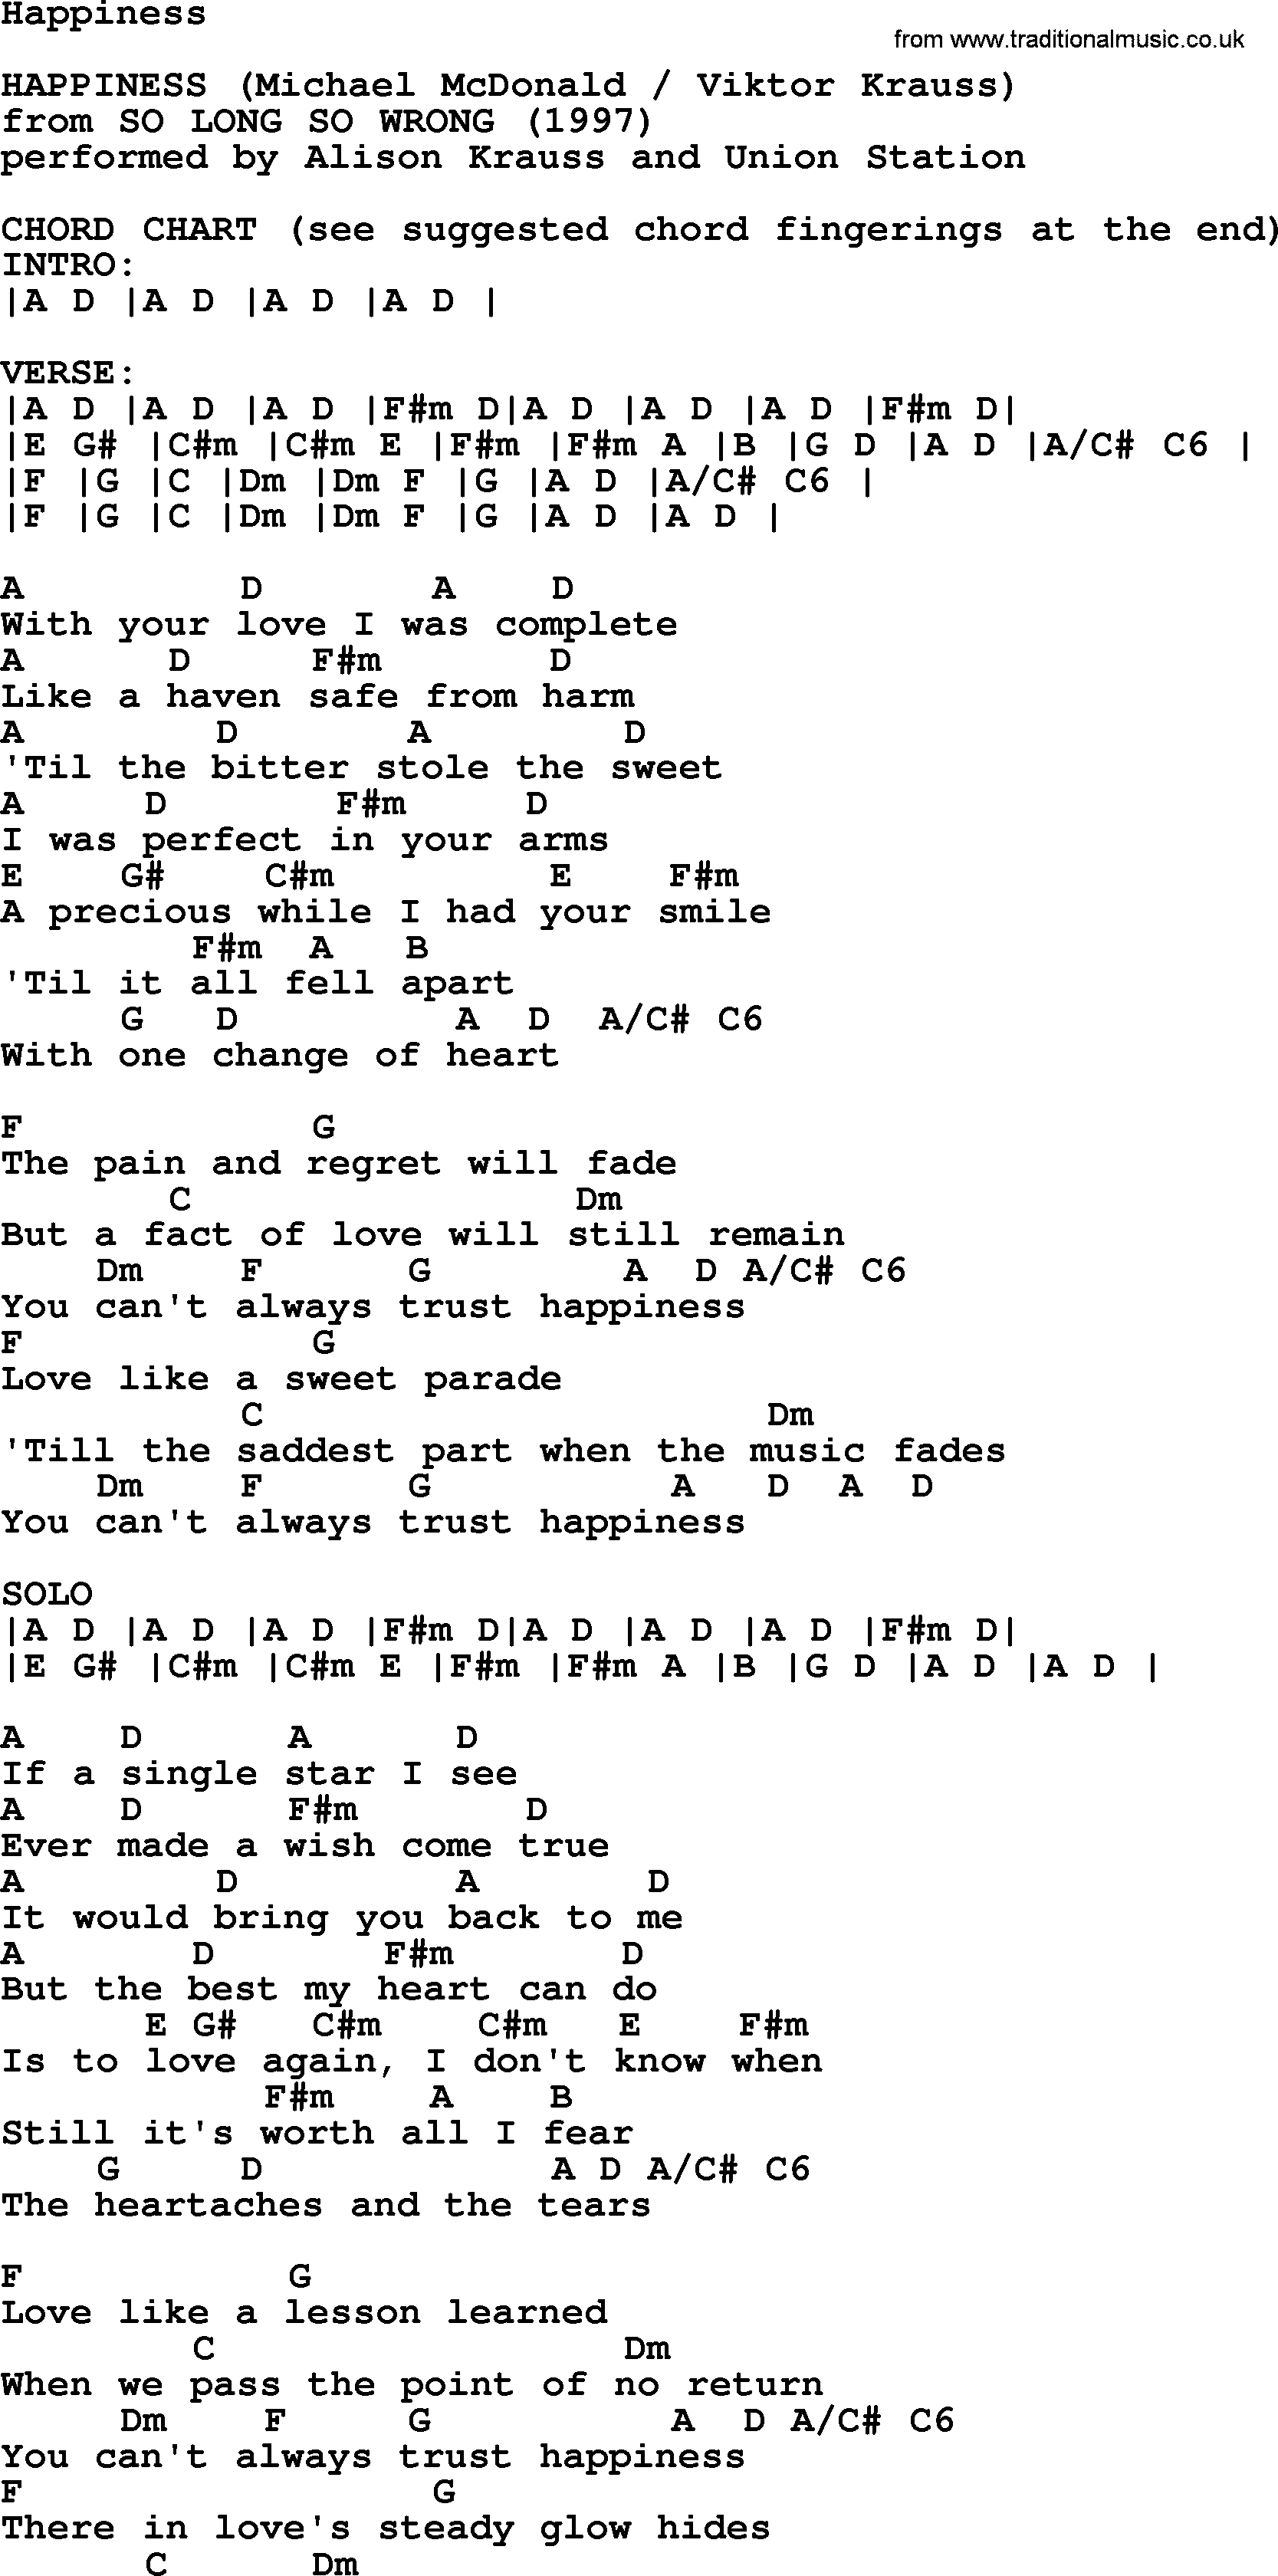 Bluegrass song: Happiness, lyrics and chords